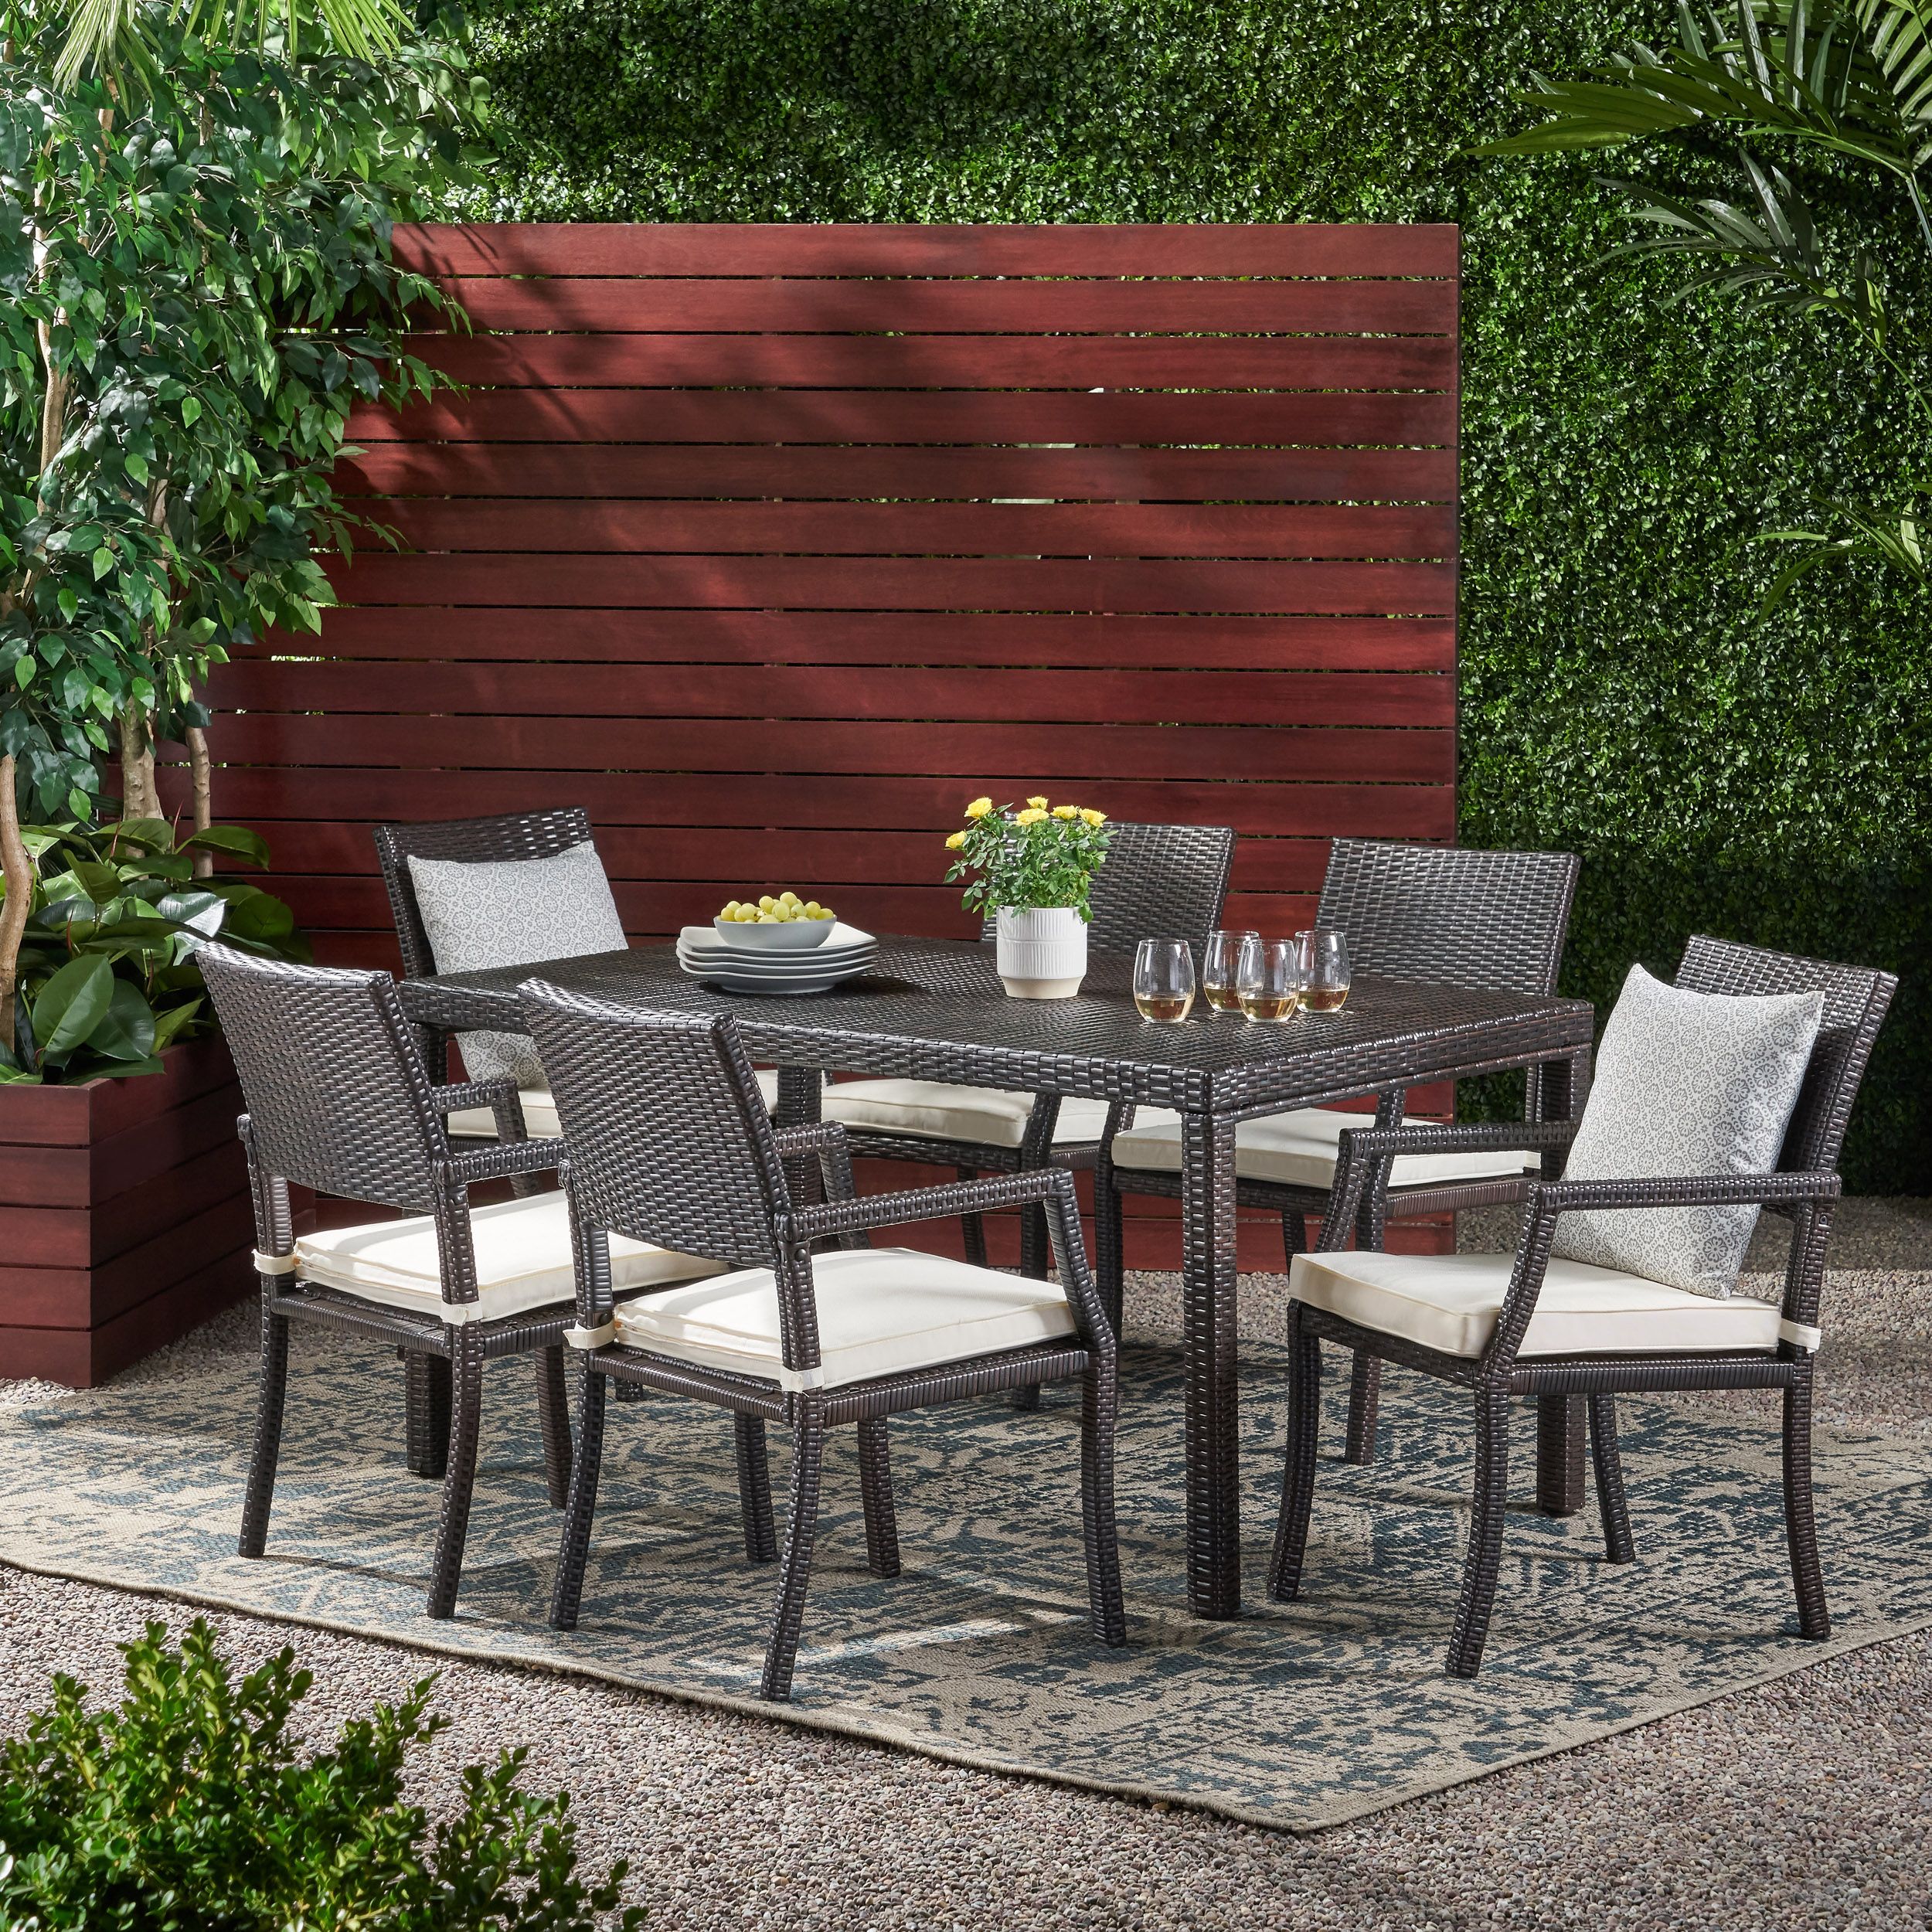 Outdoor 7 Piece Wicker Rectangular Dining Set,Multibrown,White With 7 Piece Rectangular Patio Dining Sets (View 1 of 15)